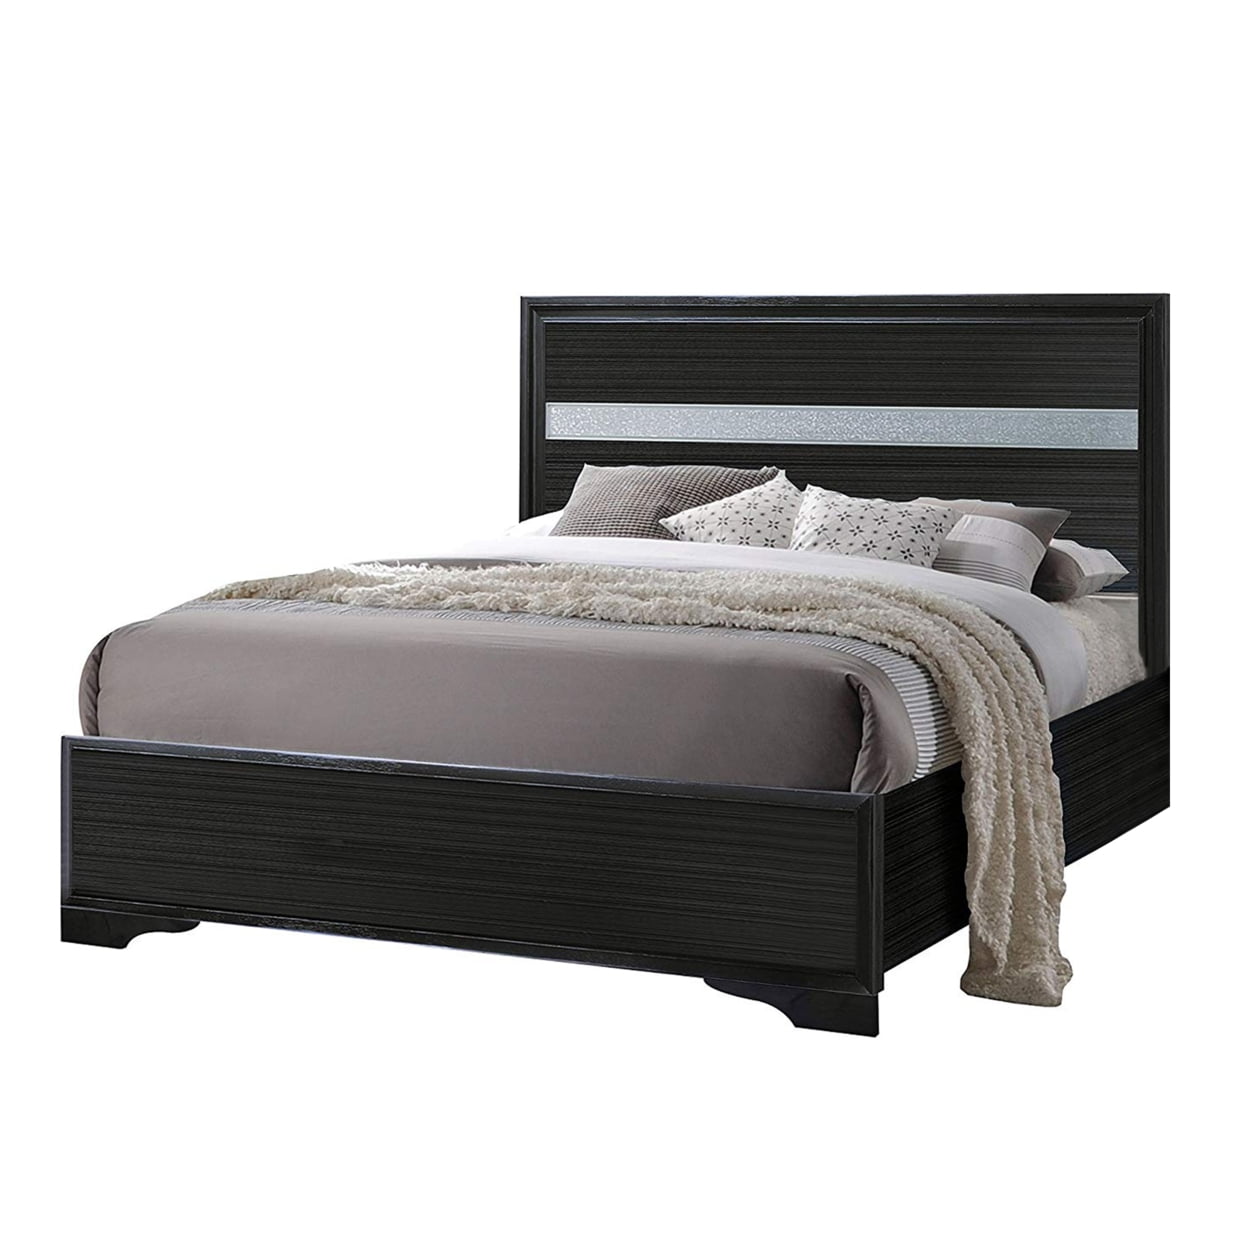 Picture of ACME 25910T Naima Twin Size Bed, No Storage - Black, 2 Piece